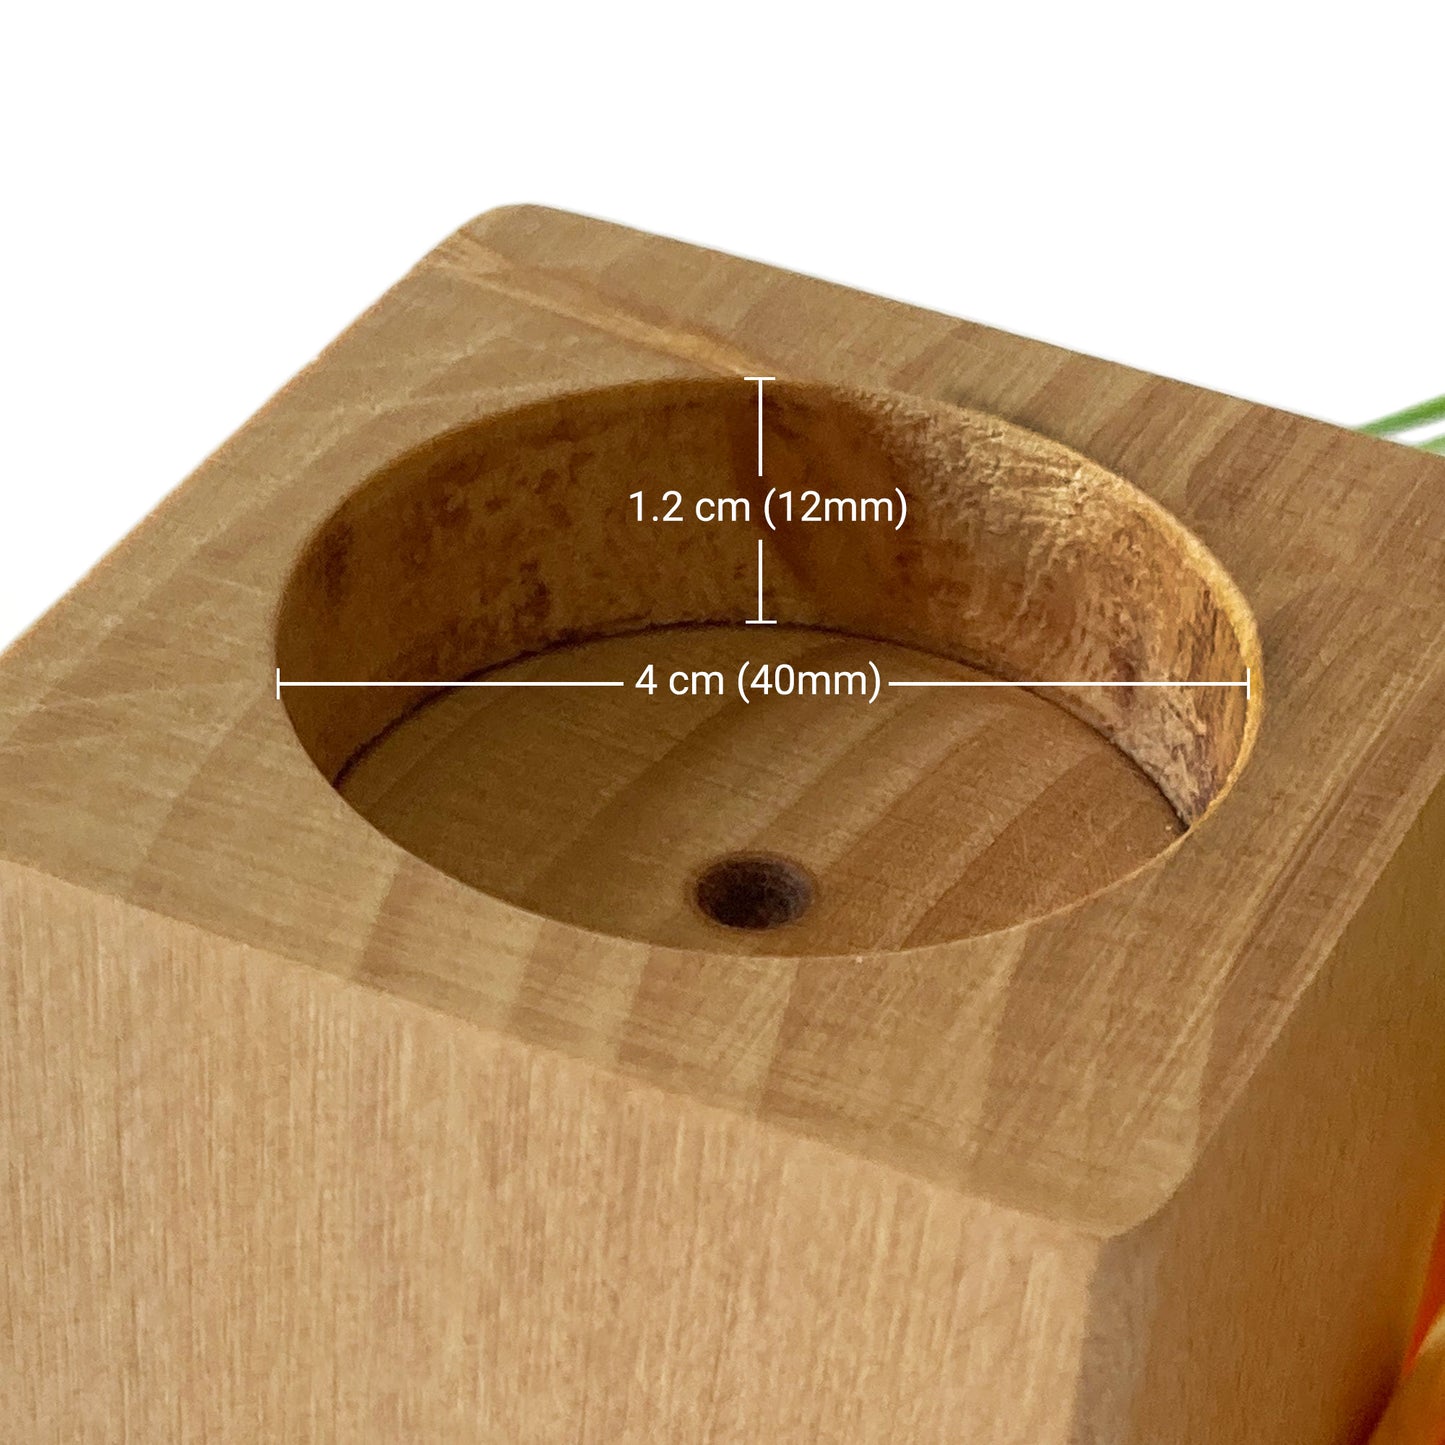 Wooden Tealight Candle Holder Pet Loss Remembrance Gift